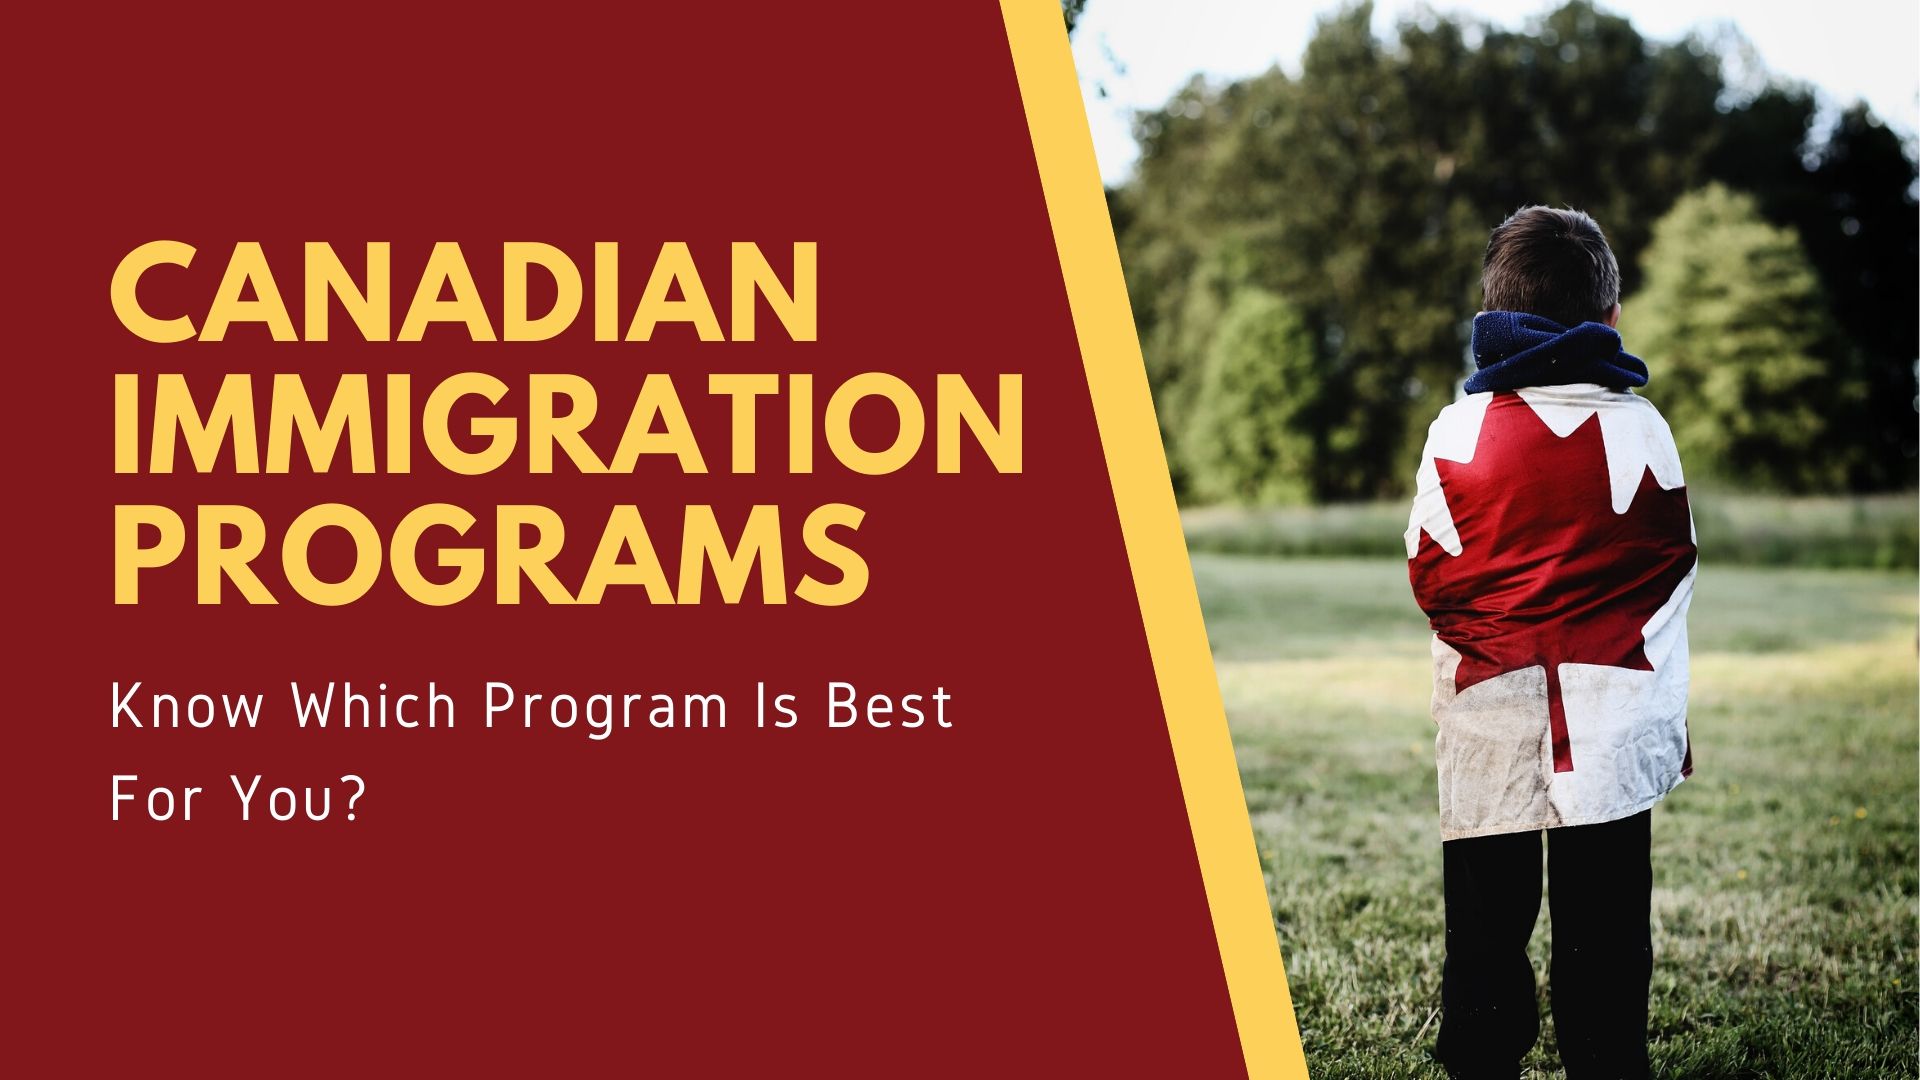 Canadian Immigration Programs - Know Which Program Is Best For You?